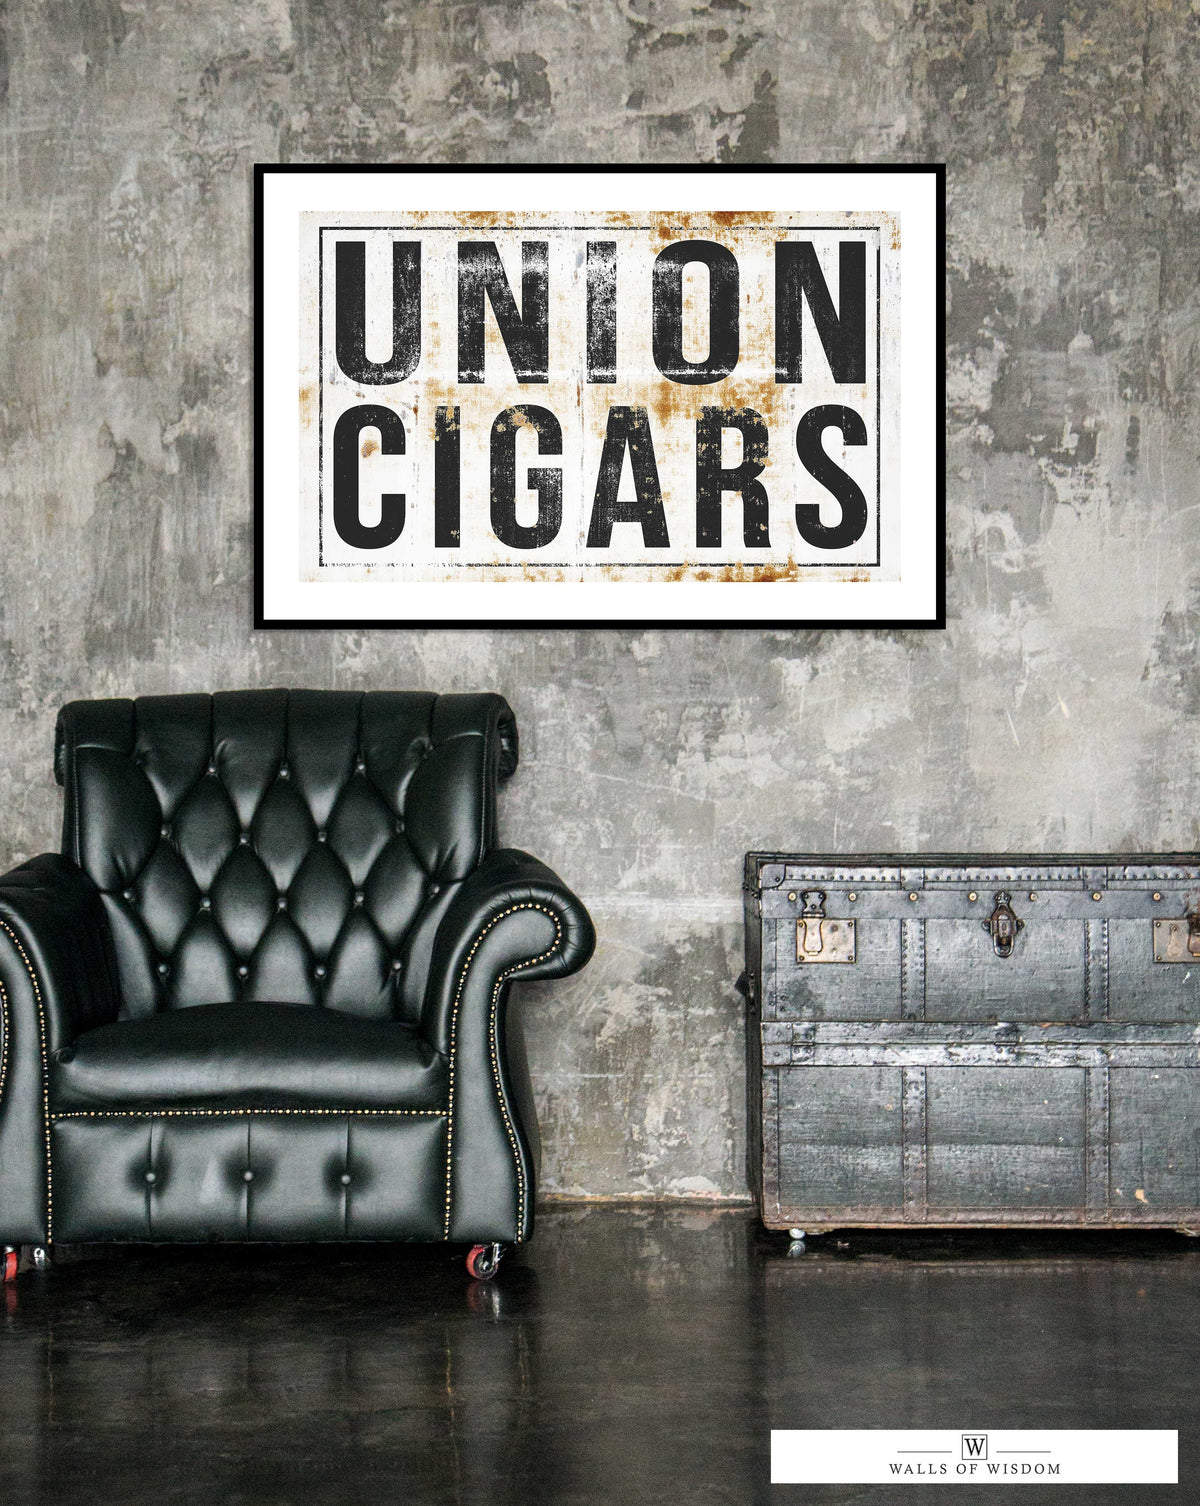 Cigar Bar & Lounge Sign for a Speakeasy Decor or Smoking Room